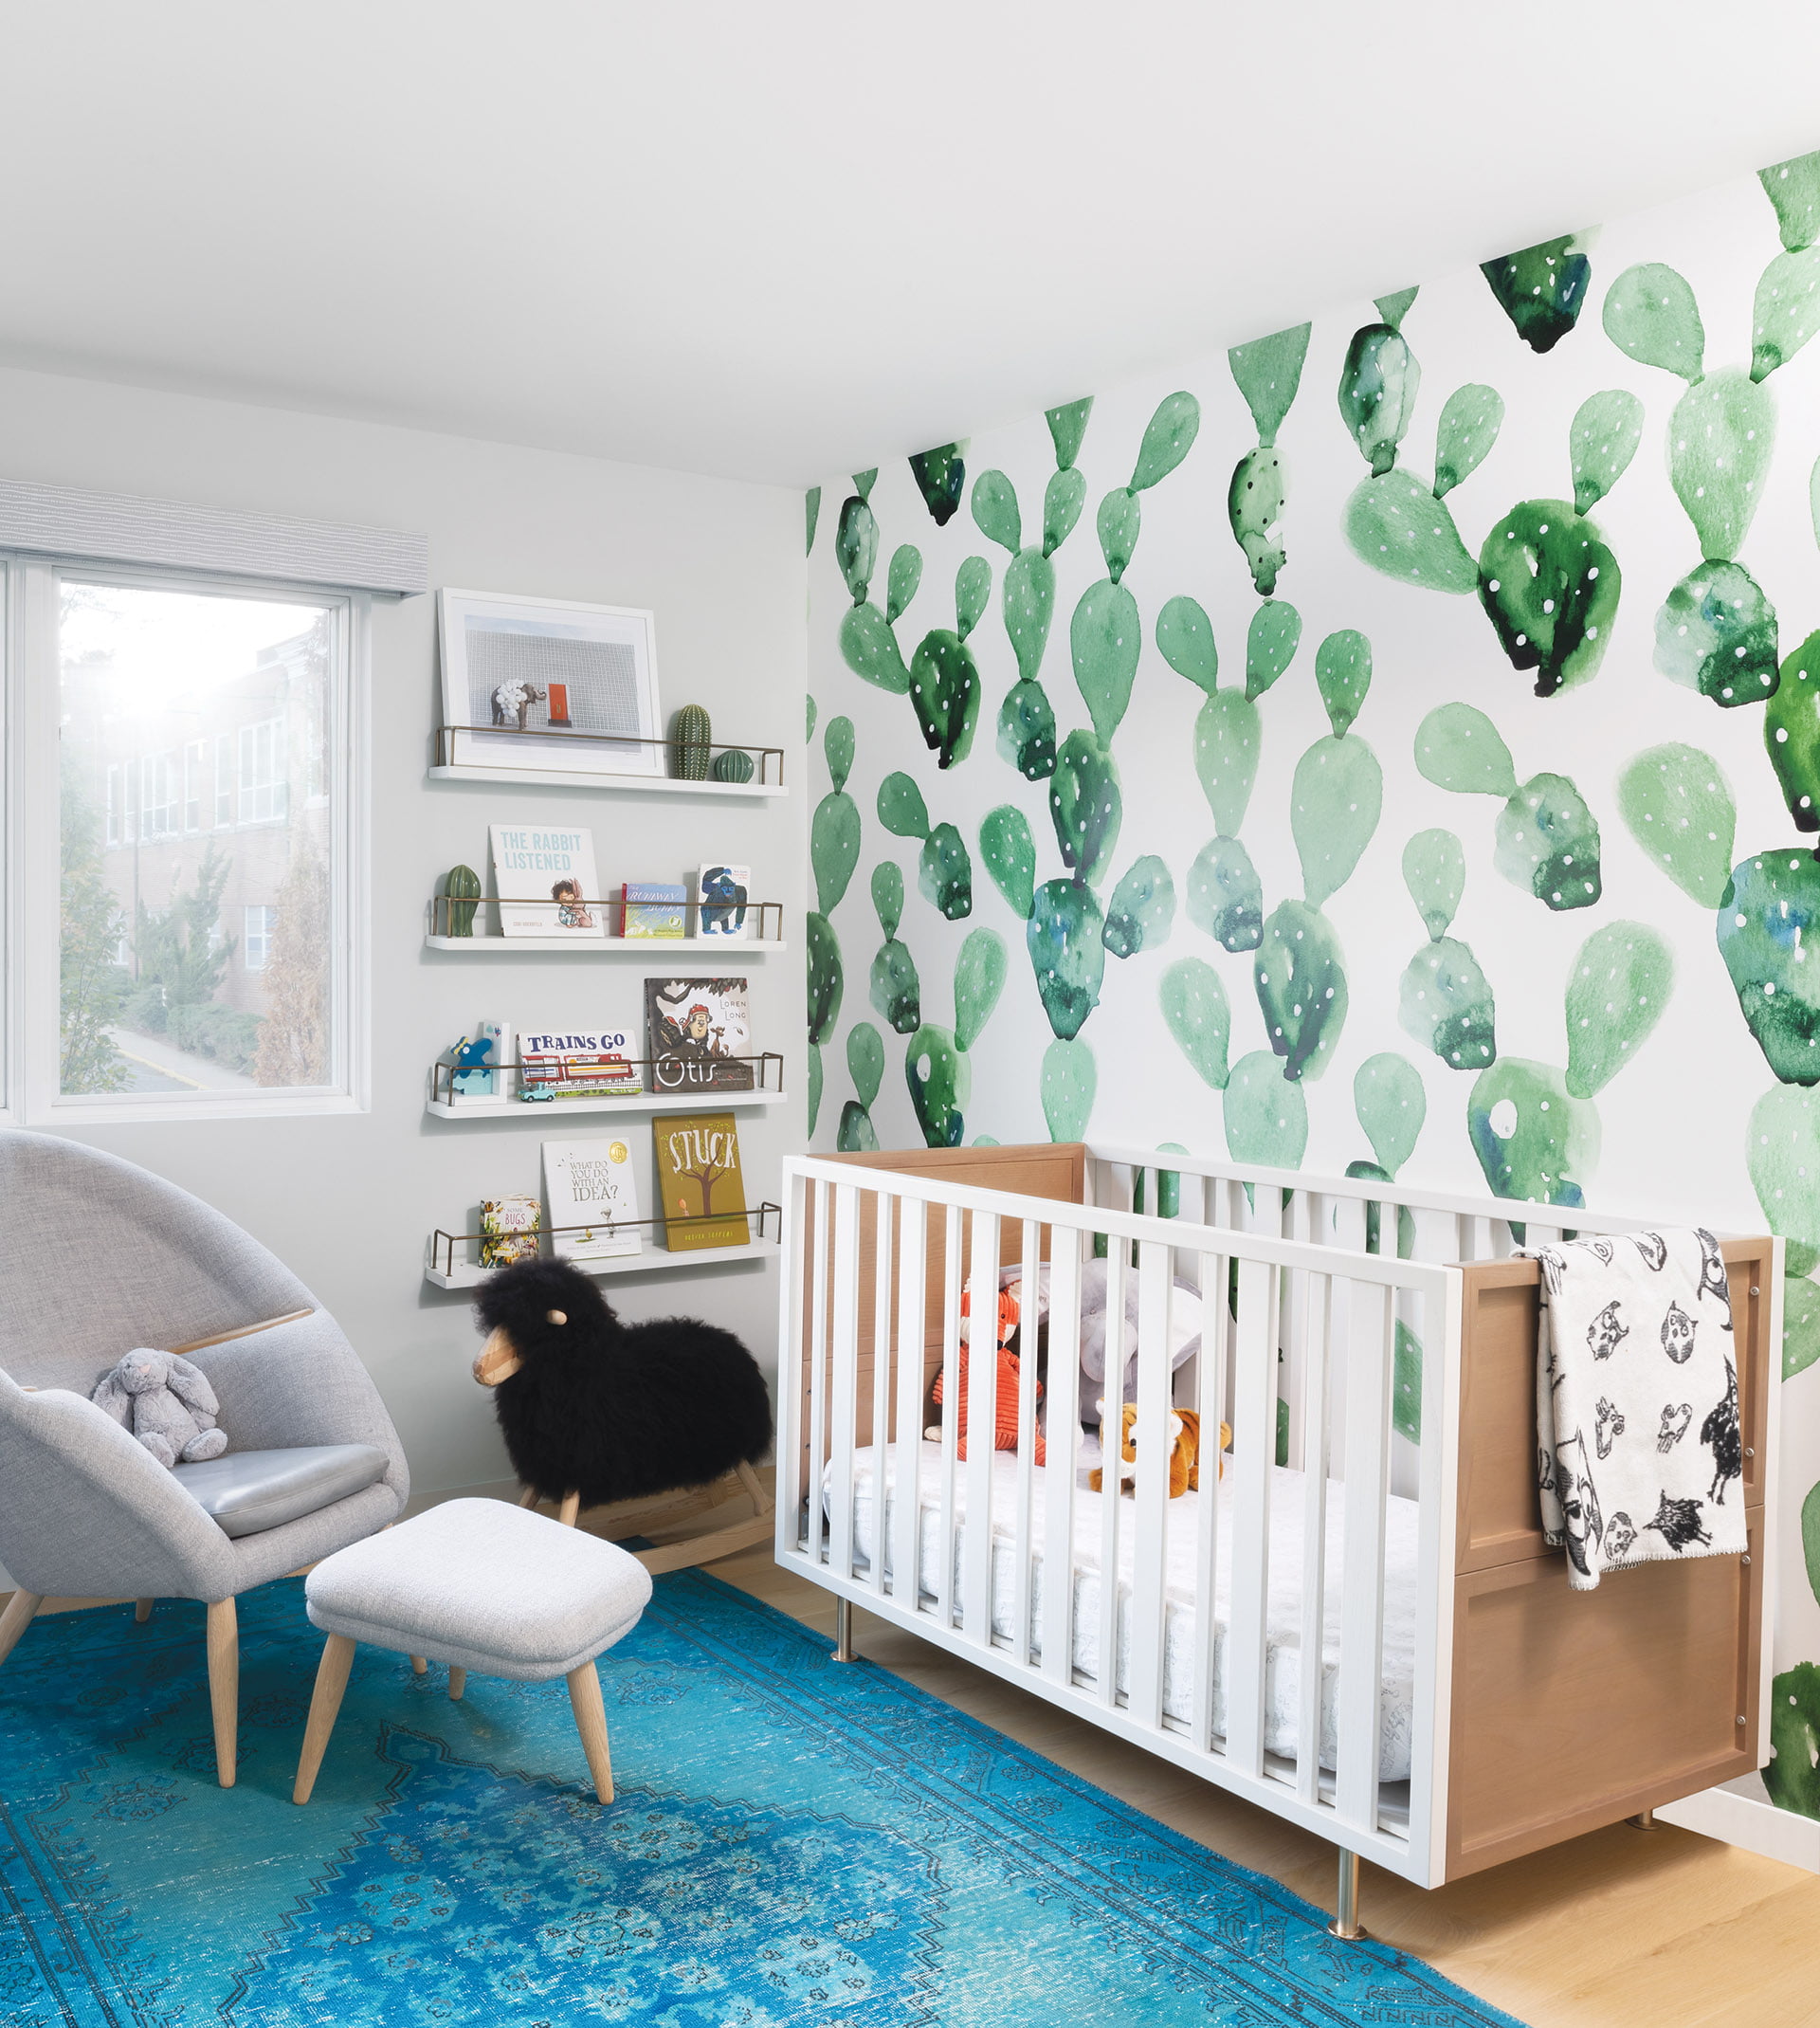 Anewall mural accents the nursery, Oda chair and ottoman by Nanna Ditzel, and overdyed vintage rug from Timothy Paul.